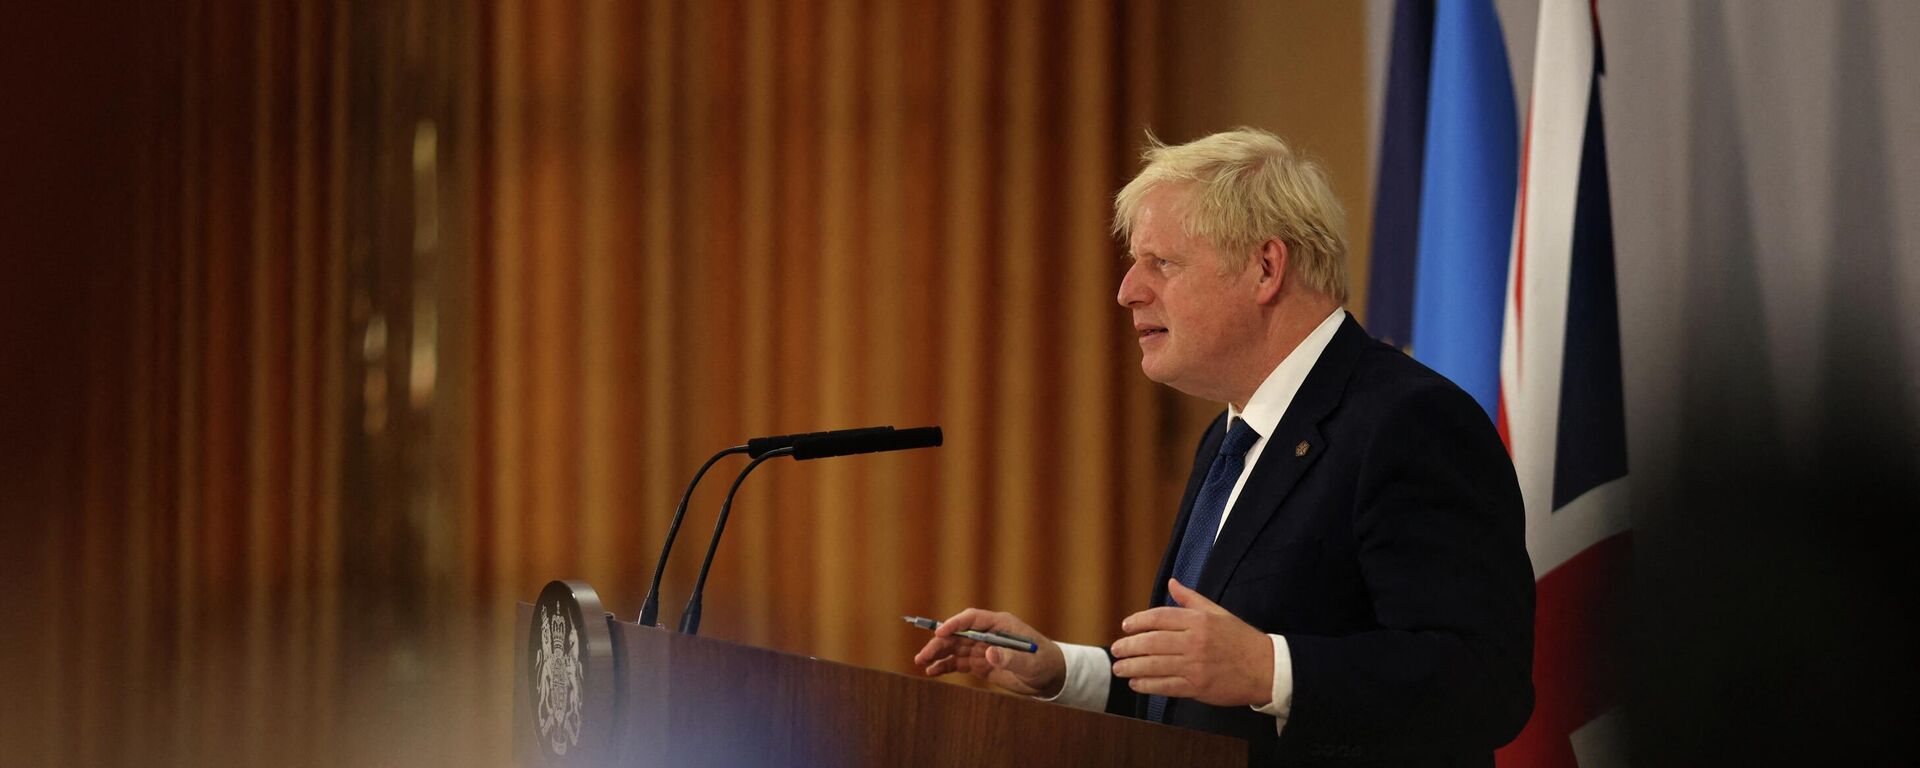 Britain's Prime Minister Boris Johnson gestures as he addresses a press conference during the Commonwealth Heads of Government Meeting (CHOGM) at Lemigo Hotel in Kigali on June 24, 2022. - Sputnik International, 1920, 25.06.2022